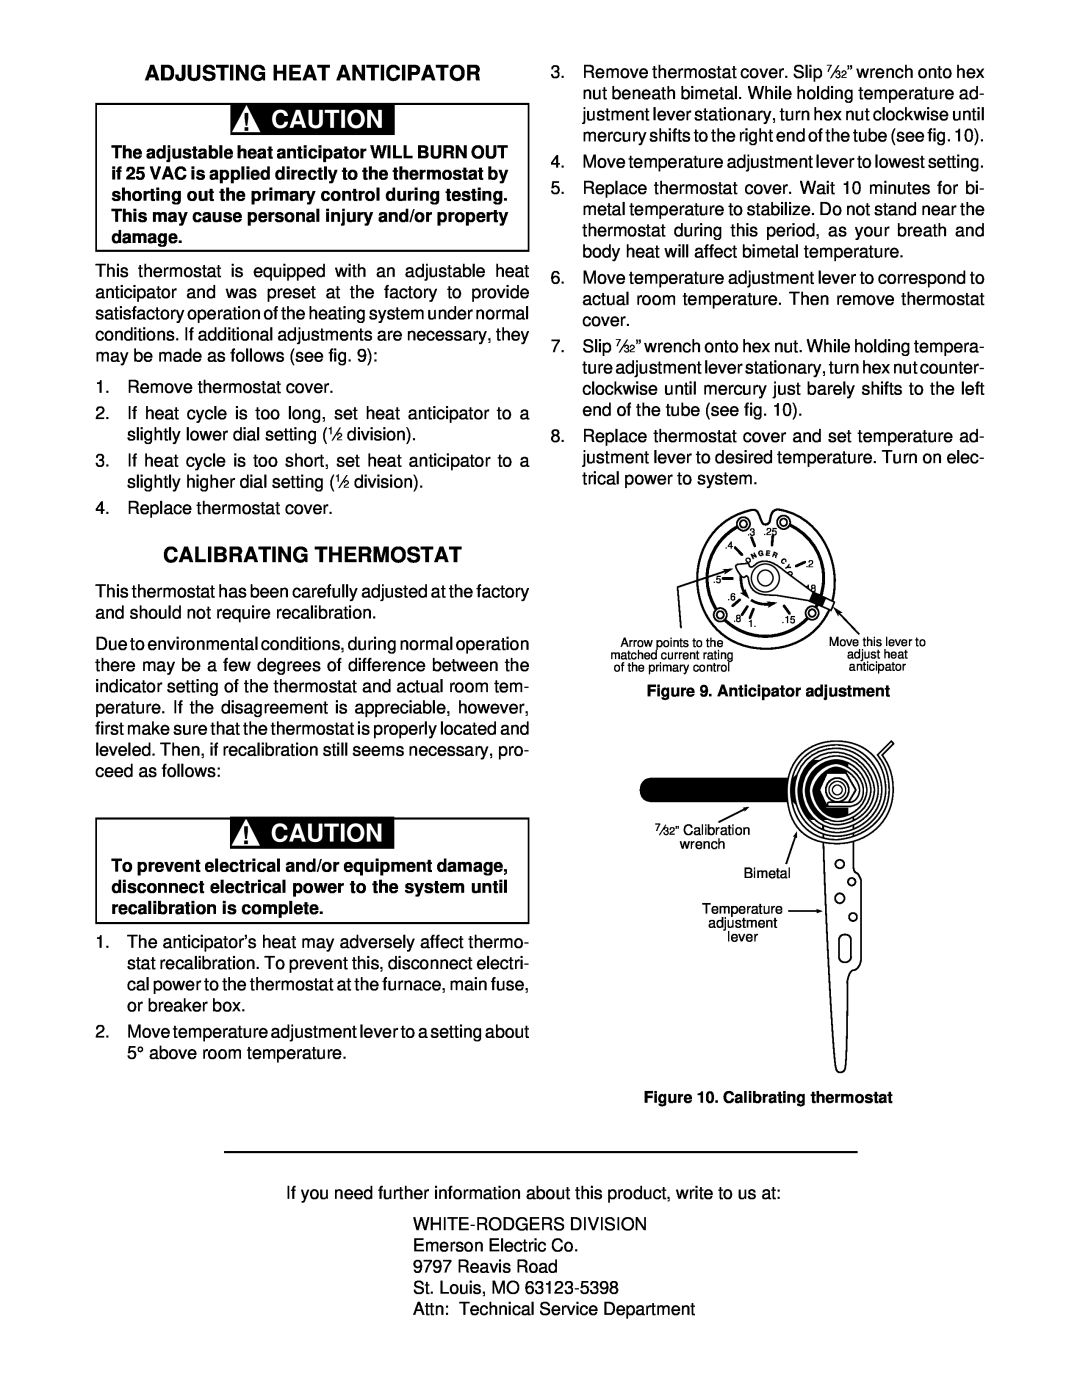 White Rodgers 1E56W-444 installation instructions Adjusting Heat Anticipator, Calibrating Thermostat 